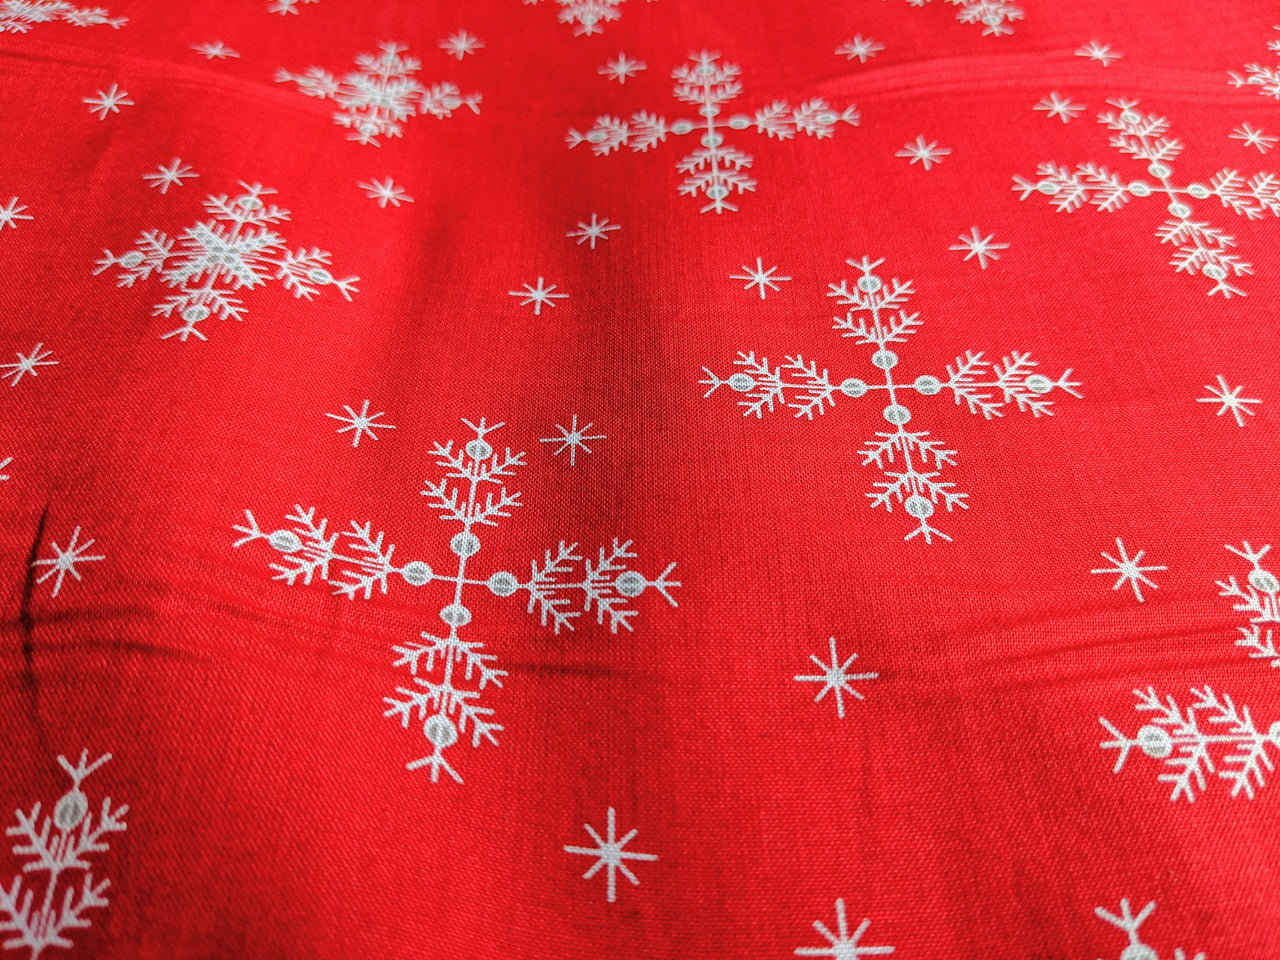 Red Cotton Fabric With White Snowflakes Christmas Fabric, Festive Fabric, Holiday Fabric